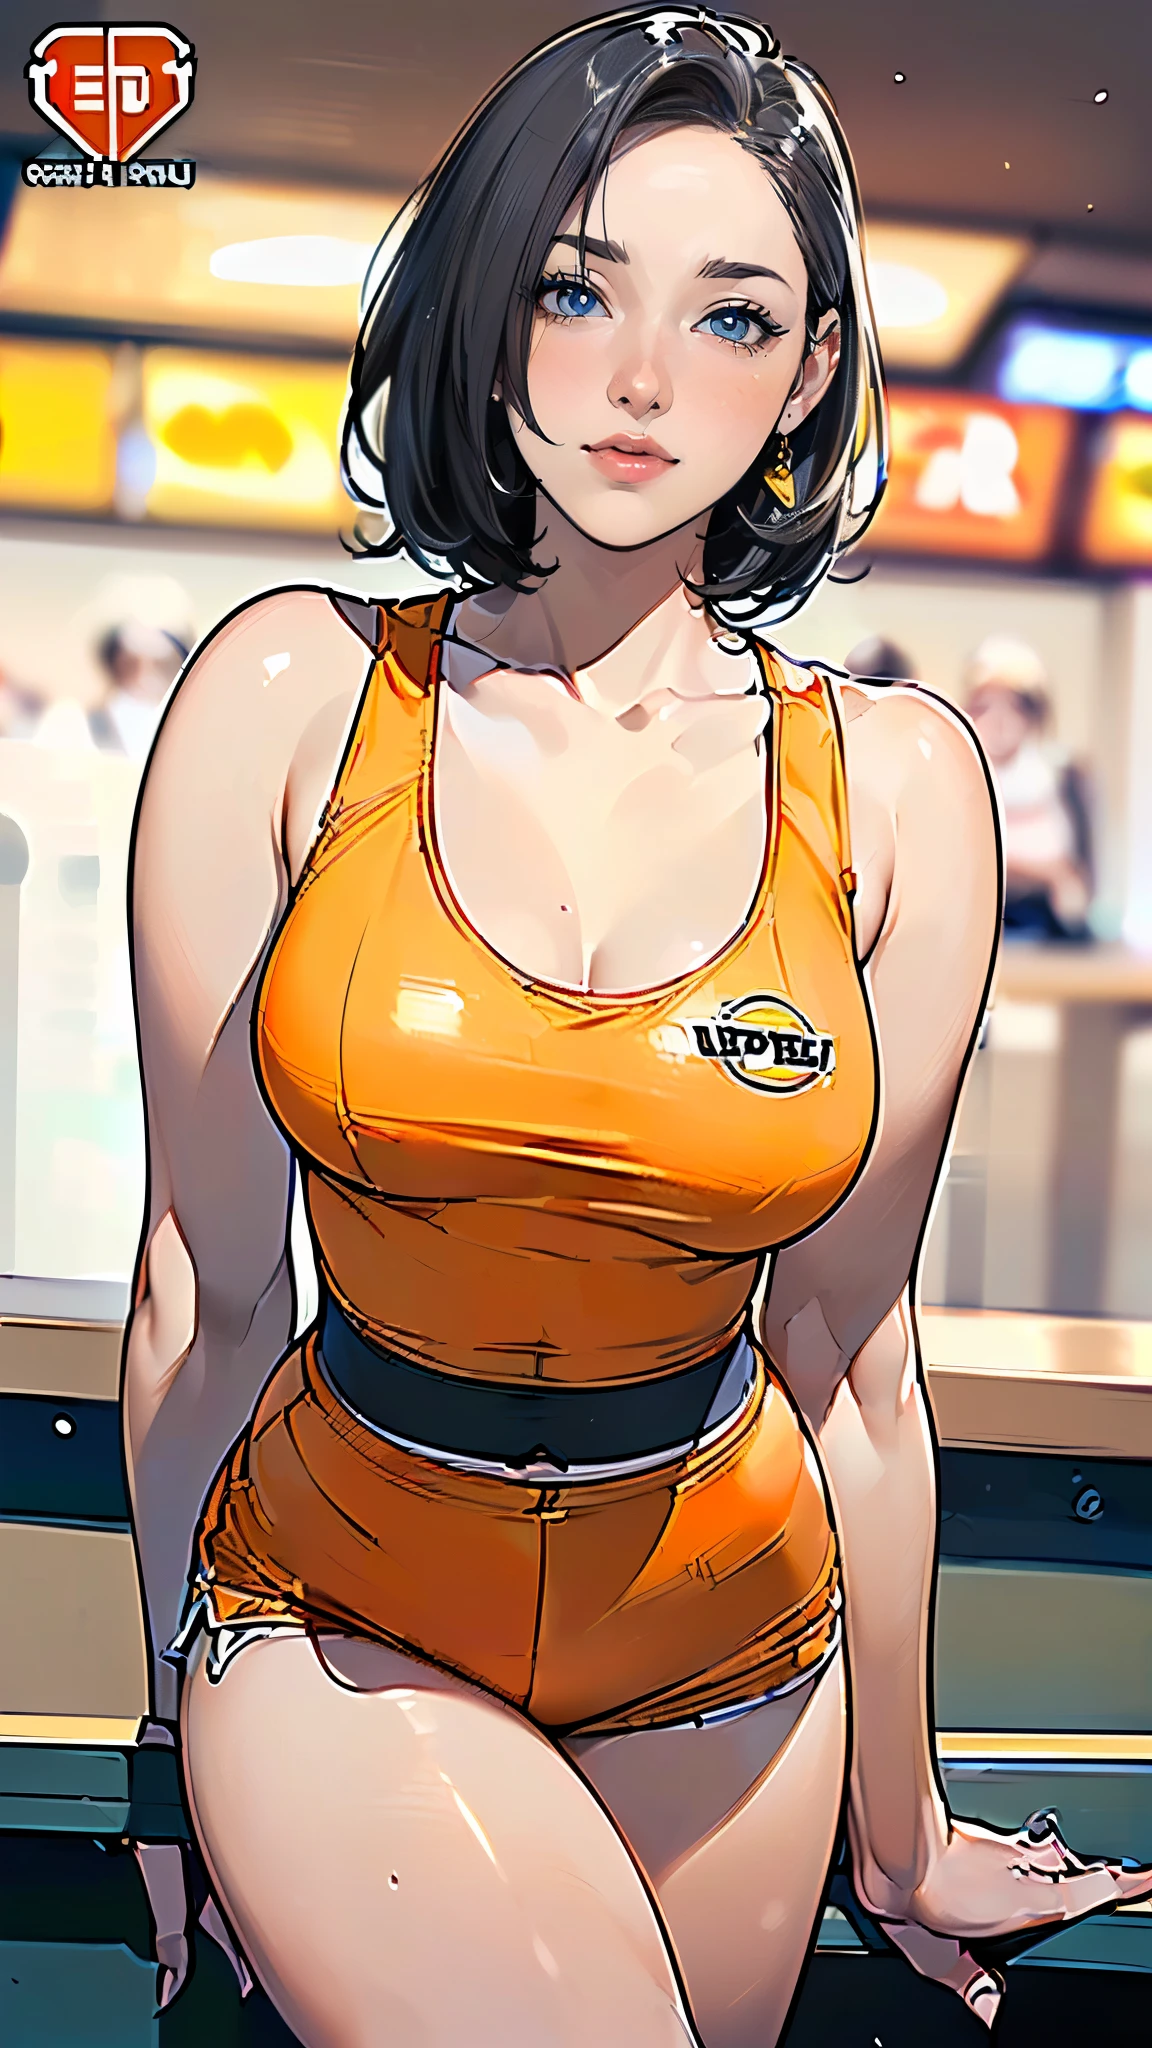 masterpiece,highest quality,Very detailed,High resolution,8k,wallpaper,Perfect lighting,BREAK(One Woman),(Mature woman working as a waiter at a sports bar:1.5),(45 years old),(hooters),(((A very form fitting white tank top:1.5))),((The tank top has the logo of a sports bar on it.:1.5)),(((tiny orange shorts))),(((Very detailed costume drawings:1.5))),(Beautiful Eyes:1.5),(Detailed face drawing:1.5),(Detailed face drawing:1.5),((Very detailed female hand:1.5)),(Shiny skin:1.2),(Big Breasts:1.2),(Thick thighs:1.5),(Sensual body:1.5),(Sports bar background:1.5),(((Blur the background:1.5))),(((I&#39;m embarrassed:1.5)))